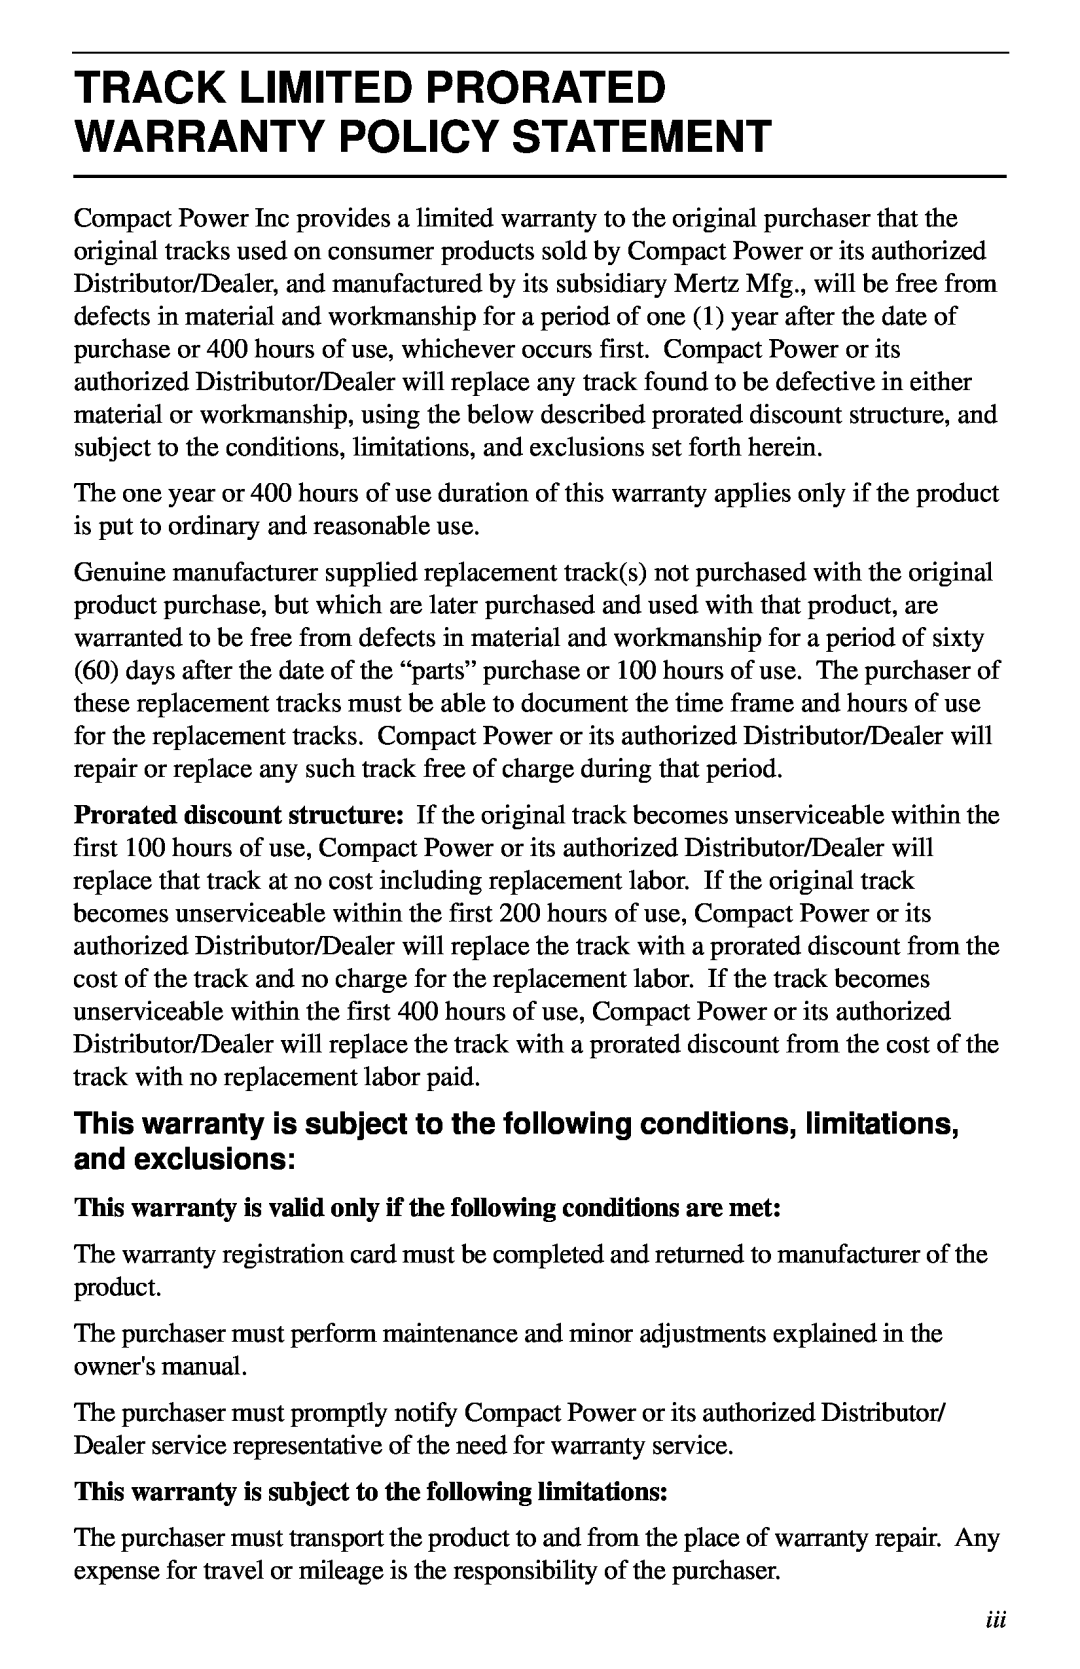 Cellboost 999-823 Track Limited Prorated Warranty Policy Statement, This warranty is subject to the following limitations 